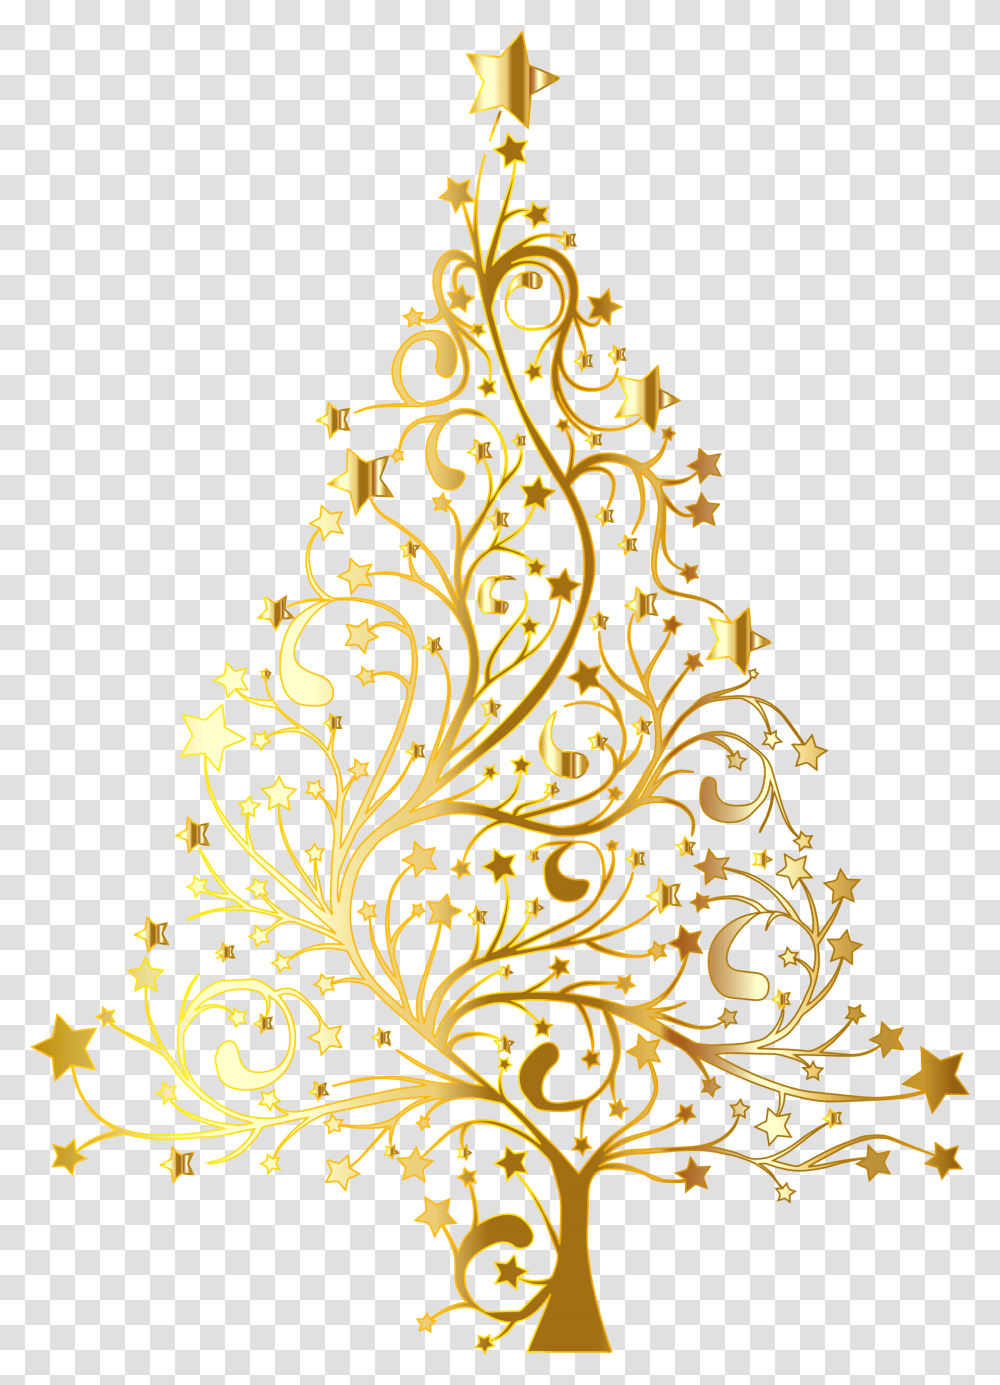 Starry Christmas Tree Gold No Background Christmas Tree Vector Gold, Floral Design, Pattern Transparent Png